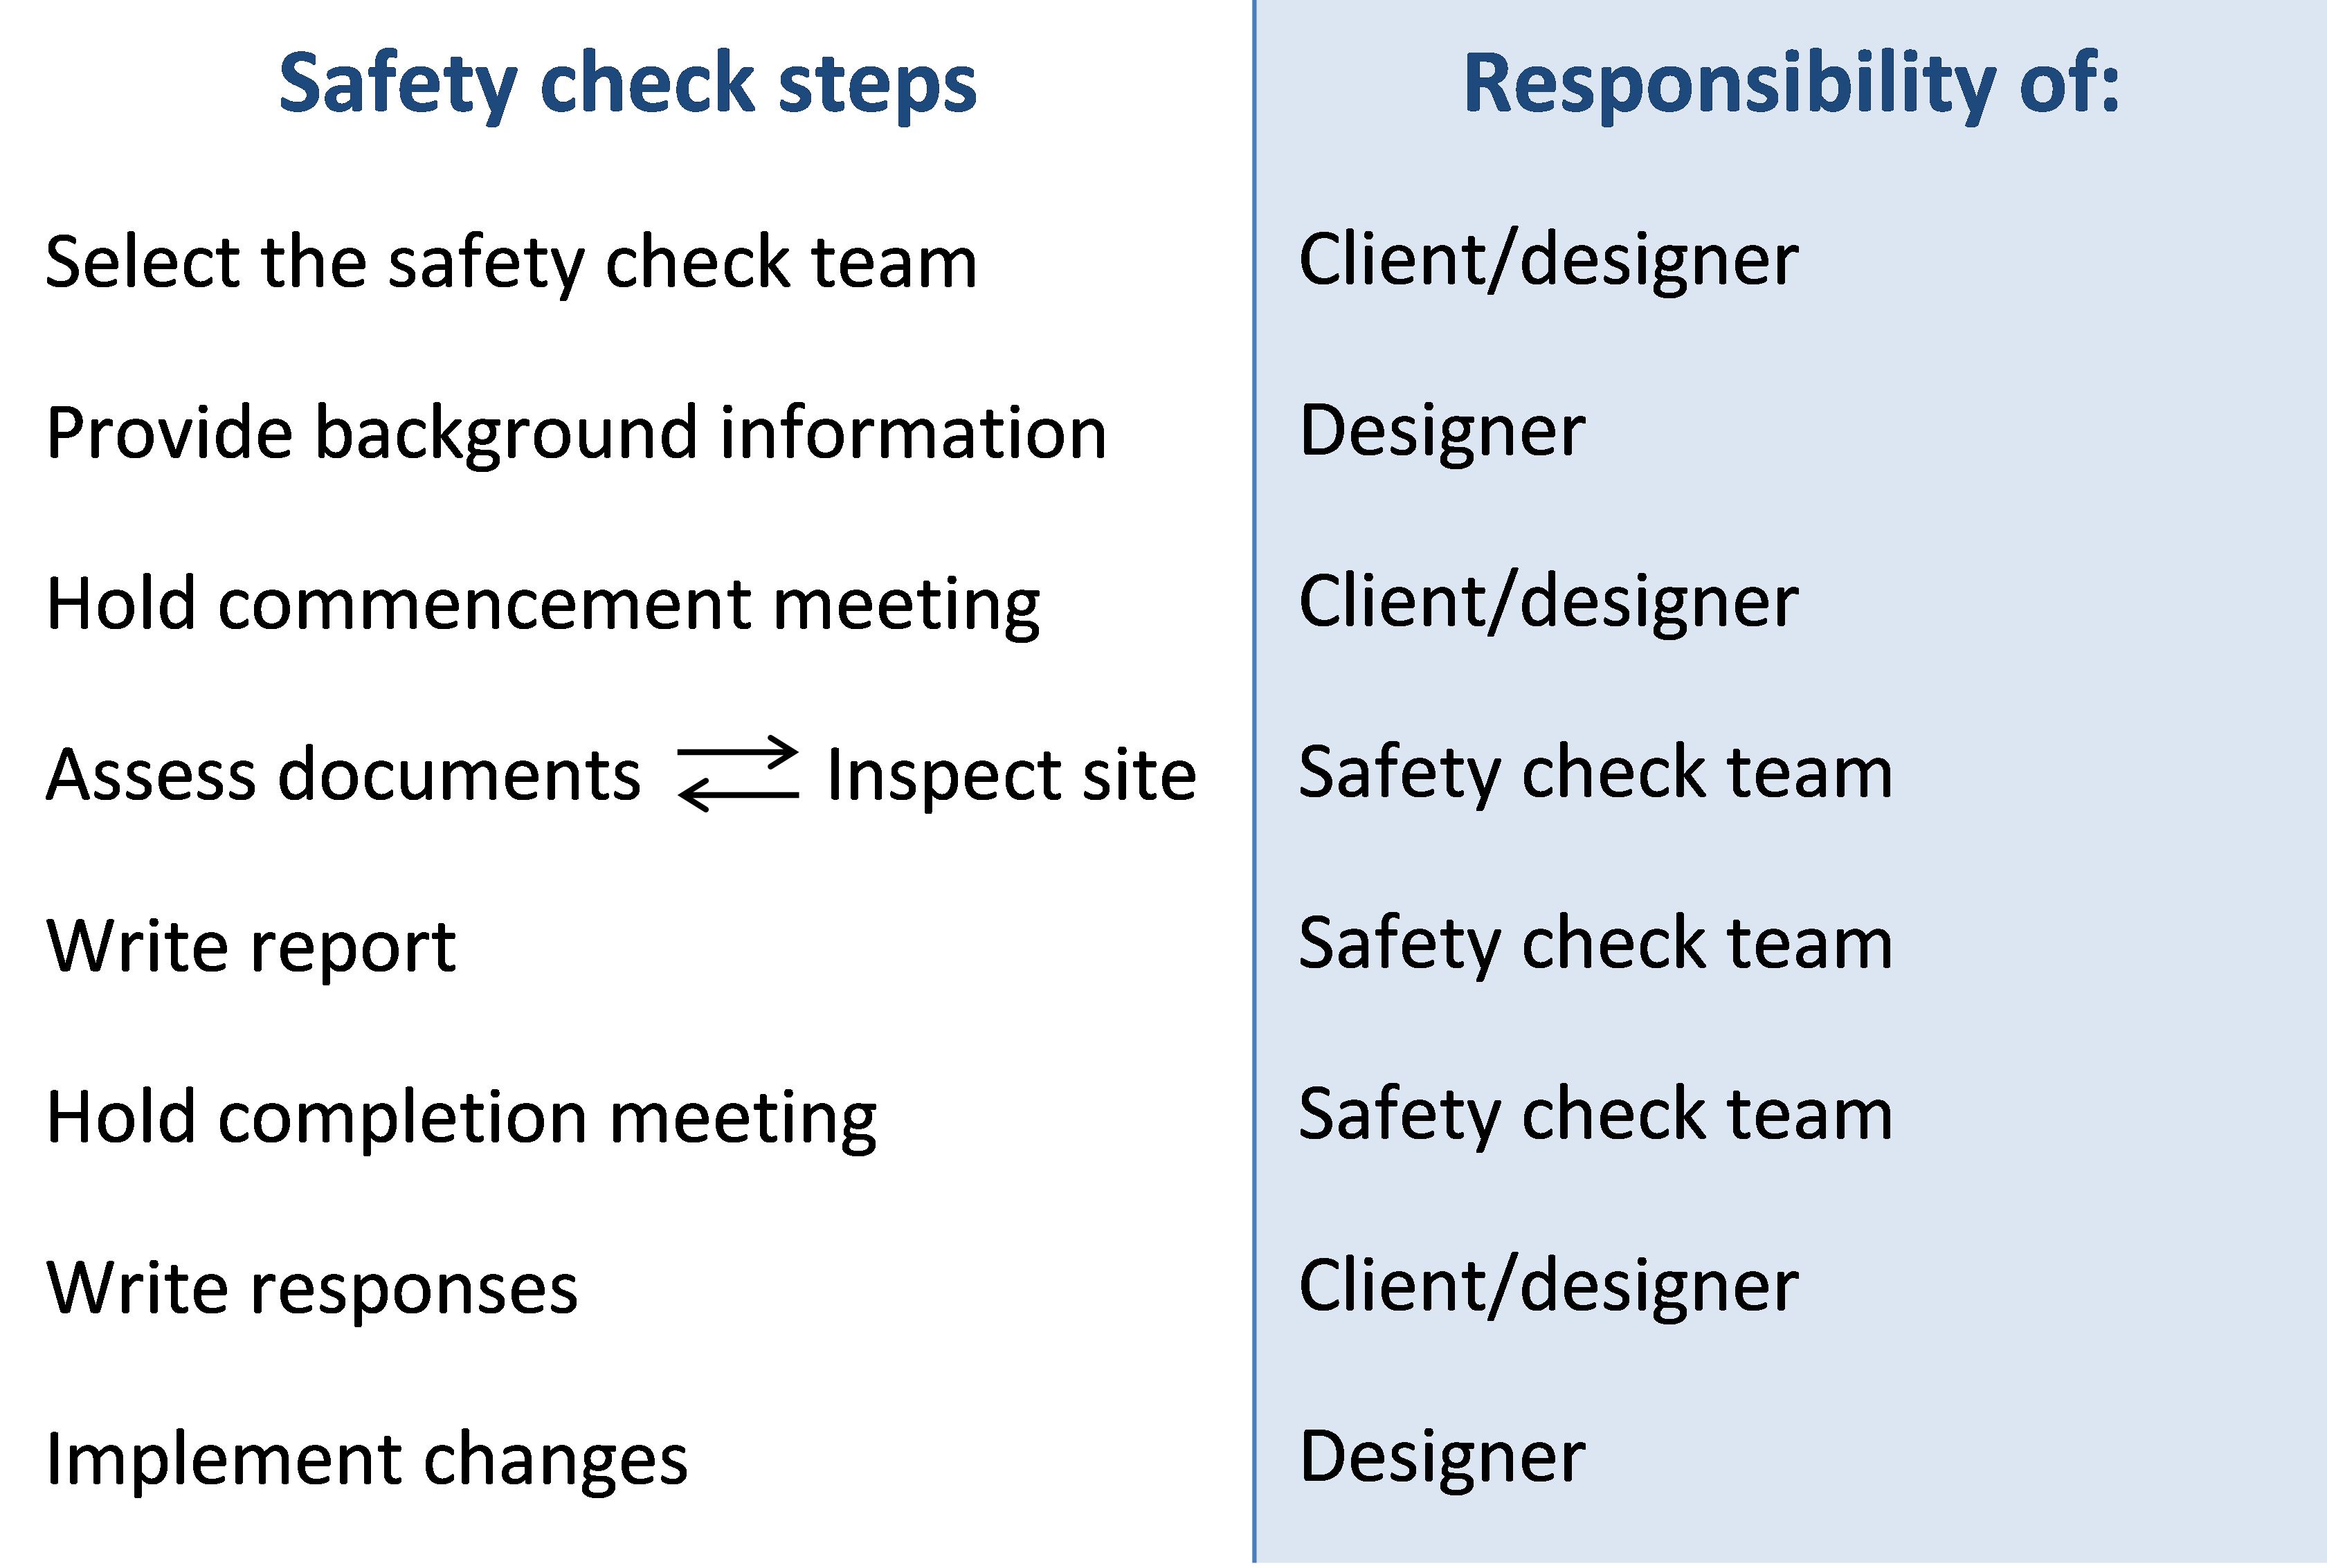 Figure 10.9 Steps involved in a safety check and allocation of responsibility